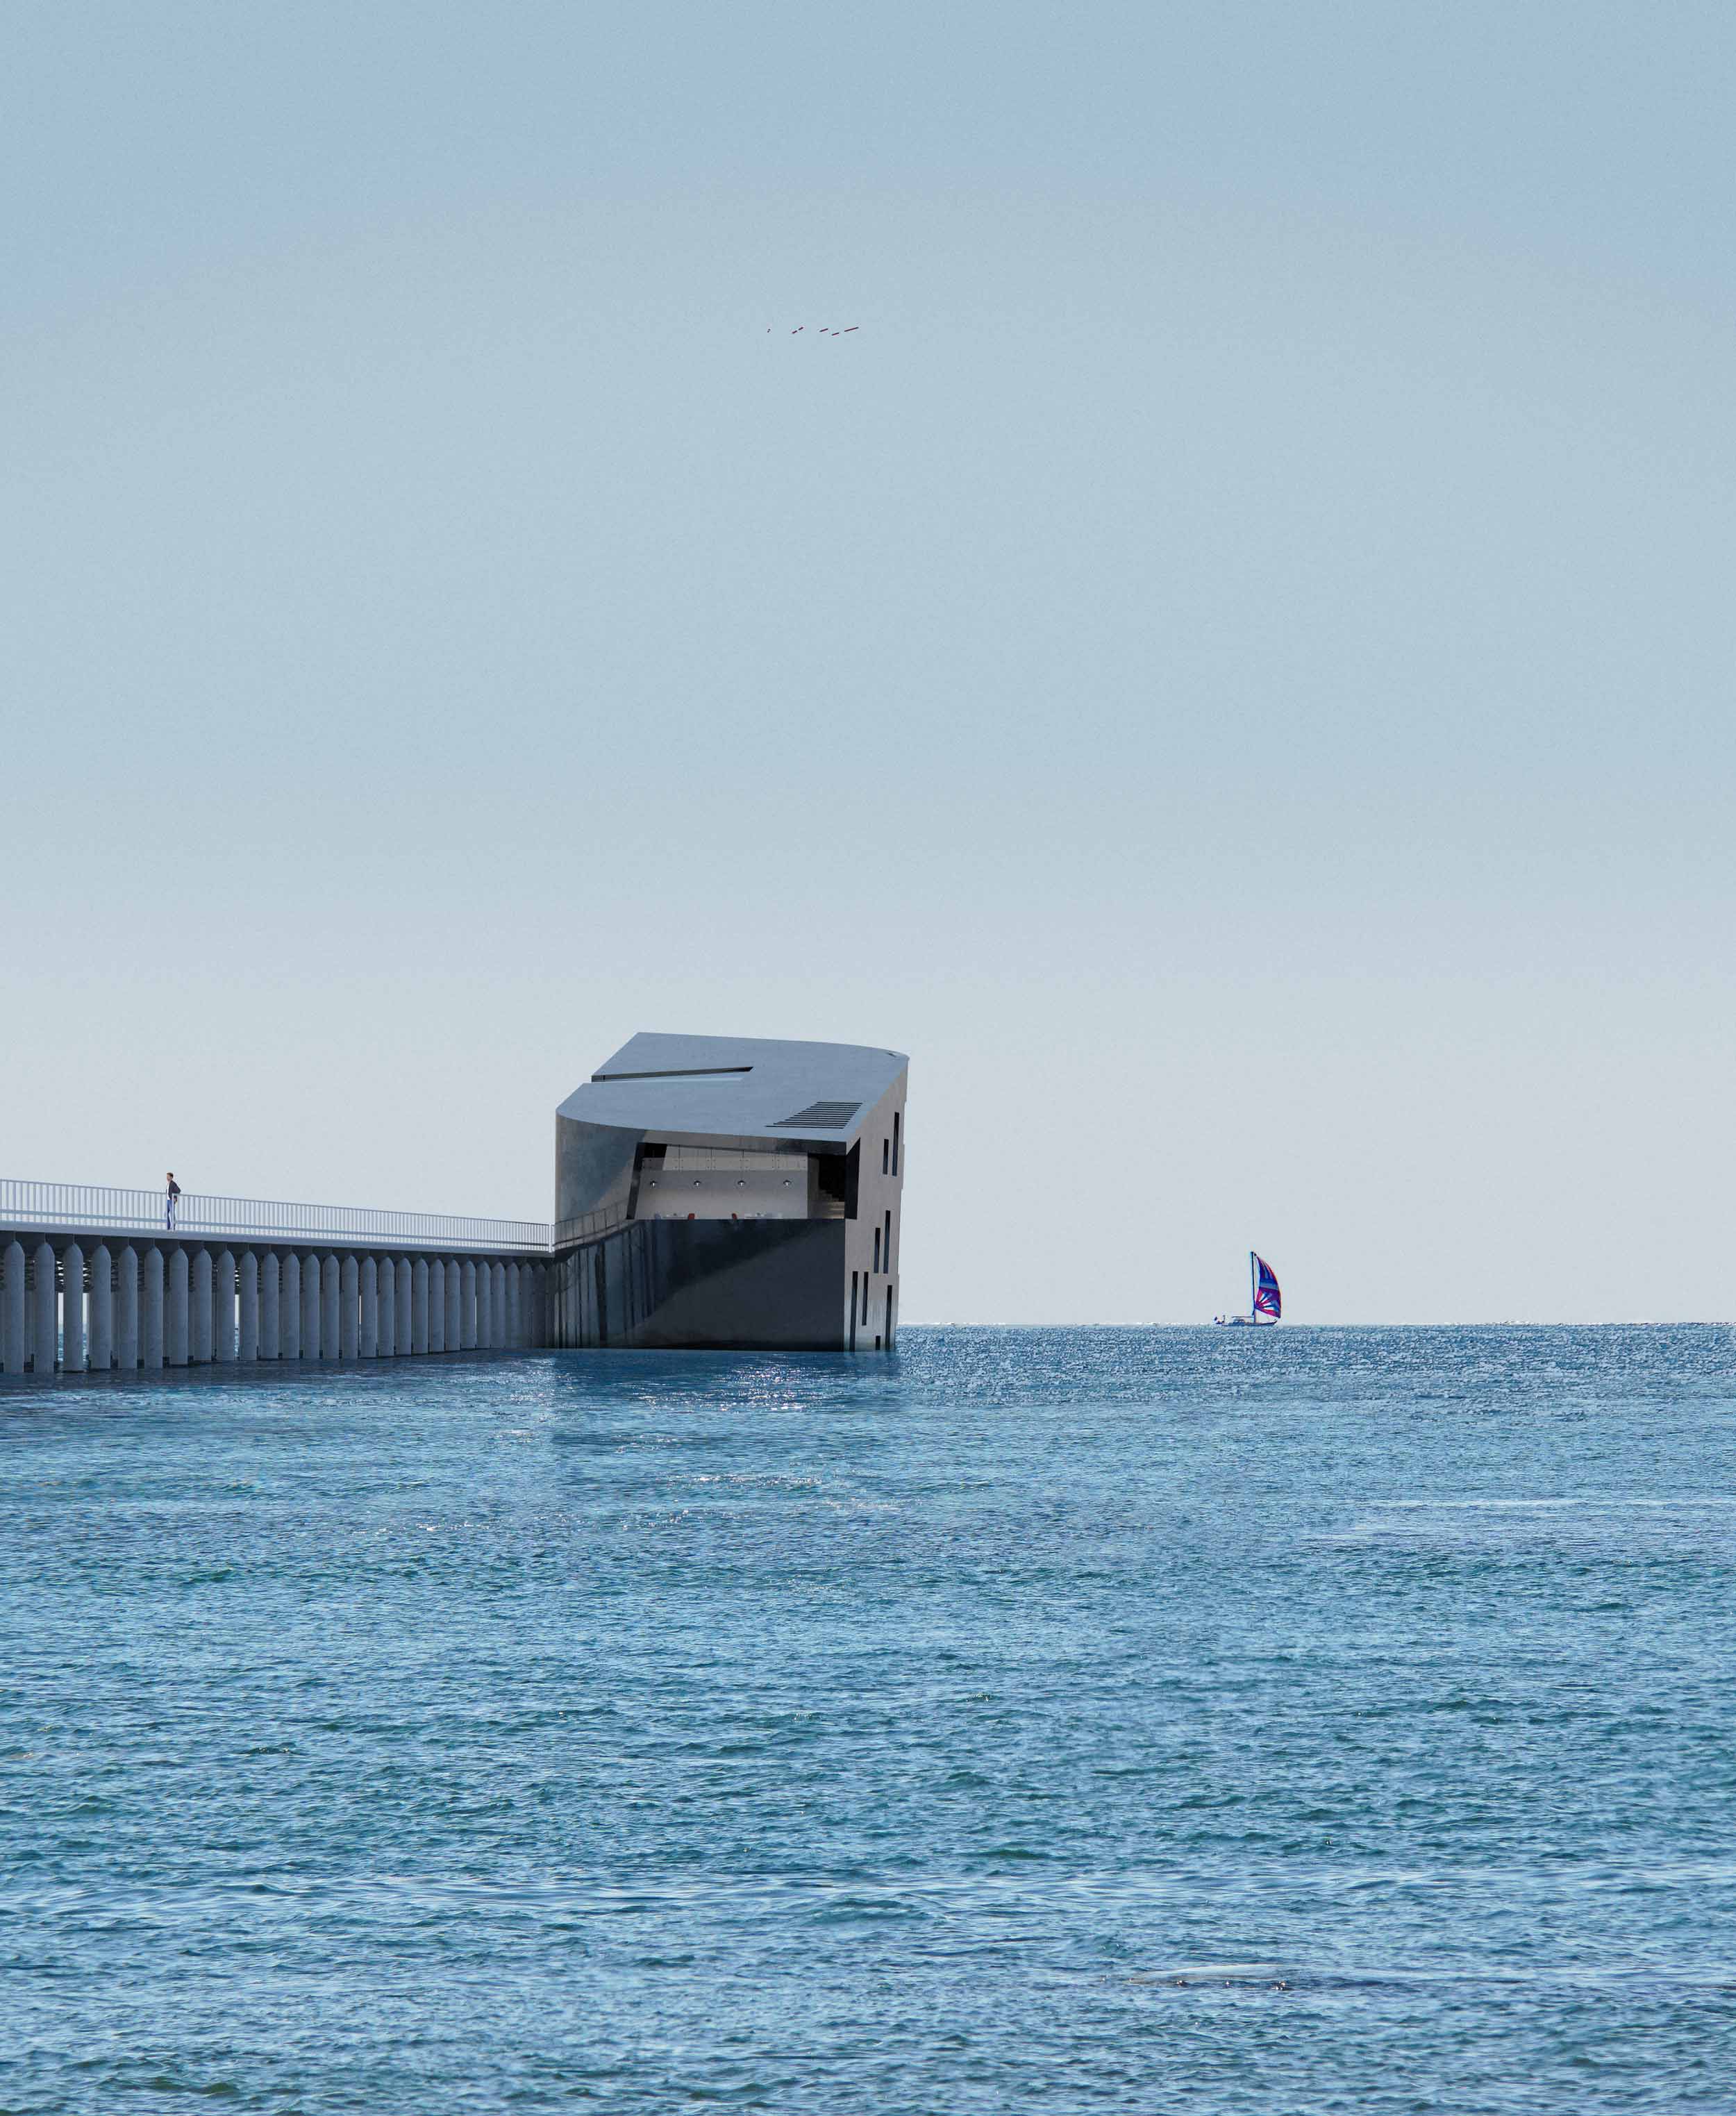 View of the VOYAGE at the end of the Busselton Jetty pier seen from coast